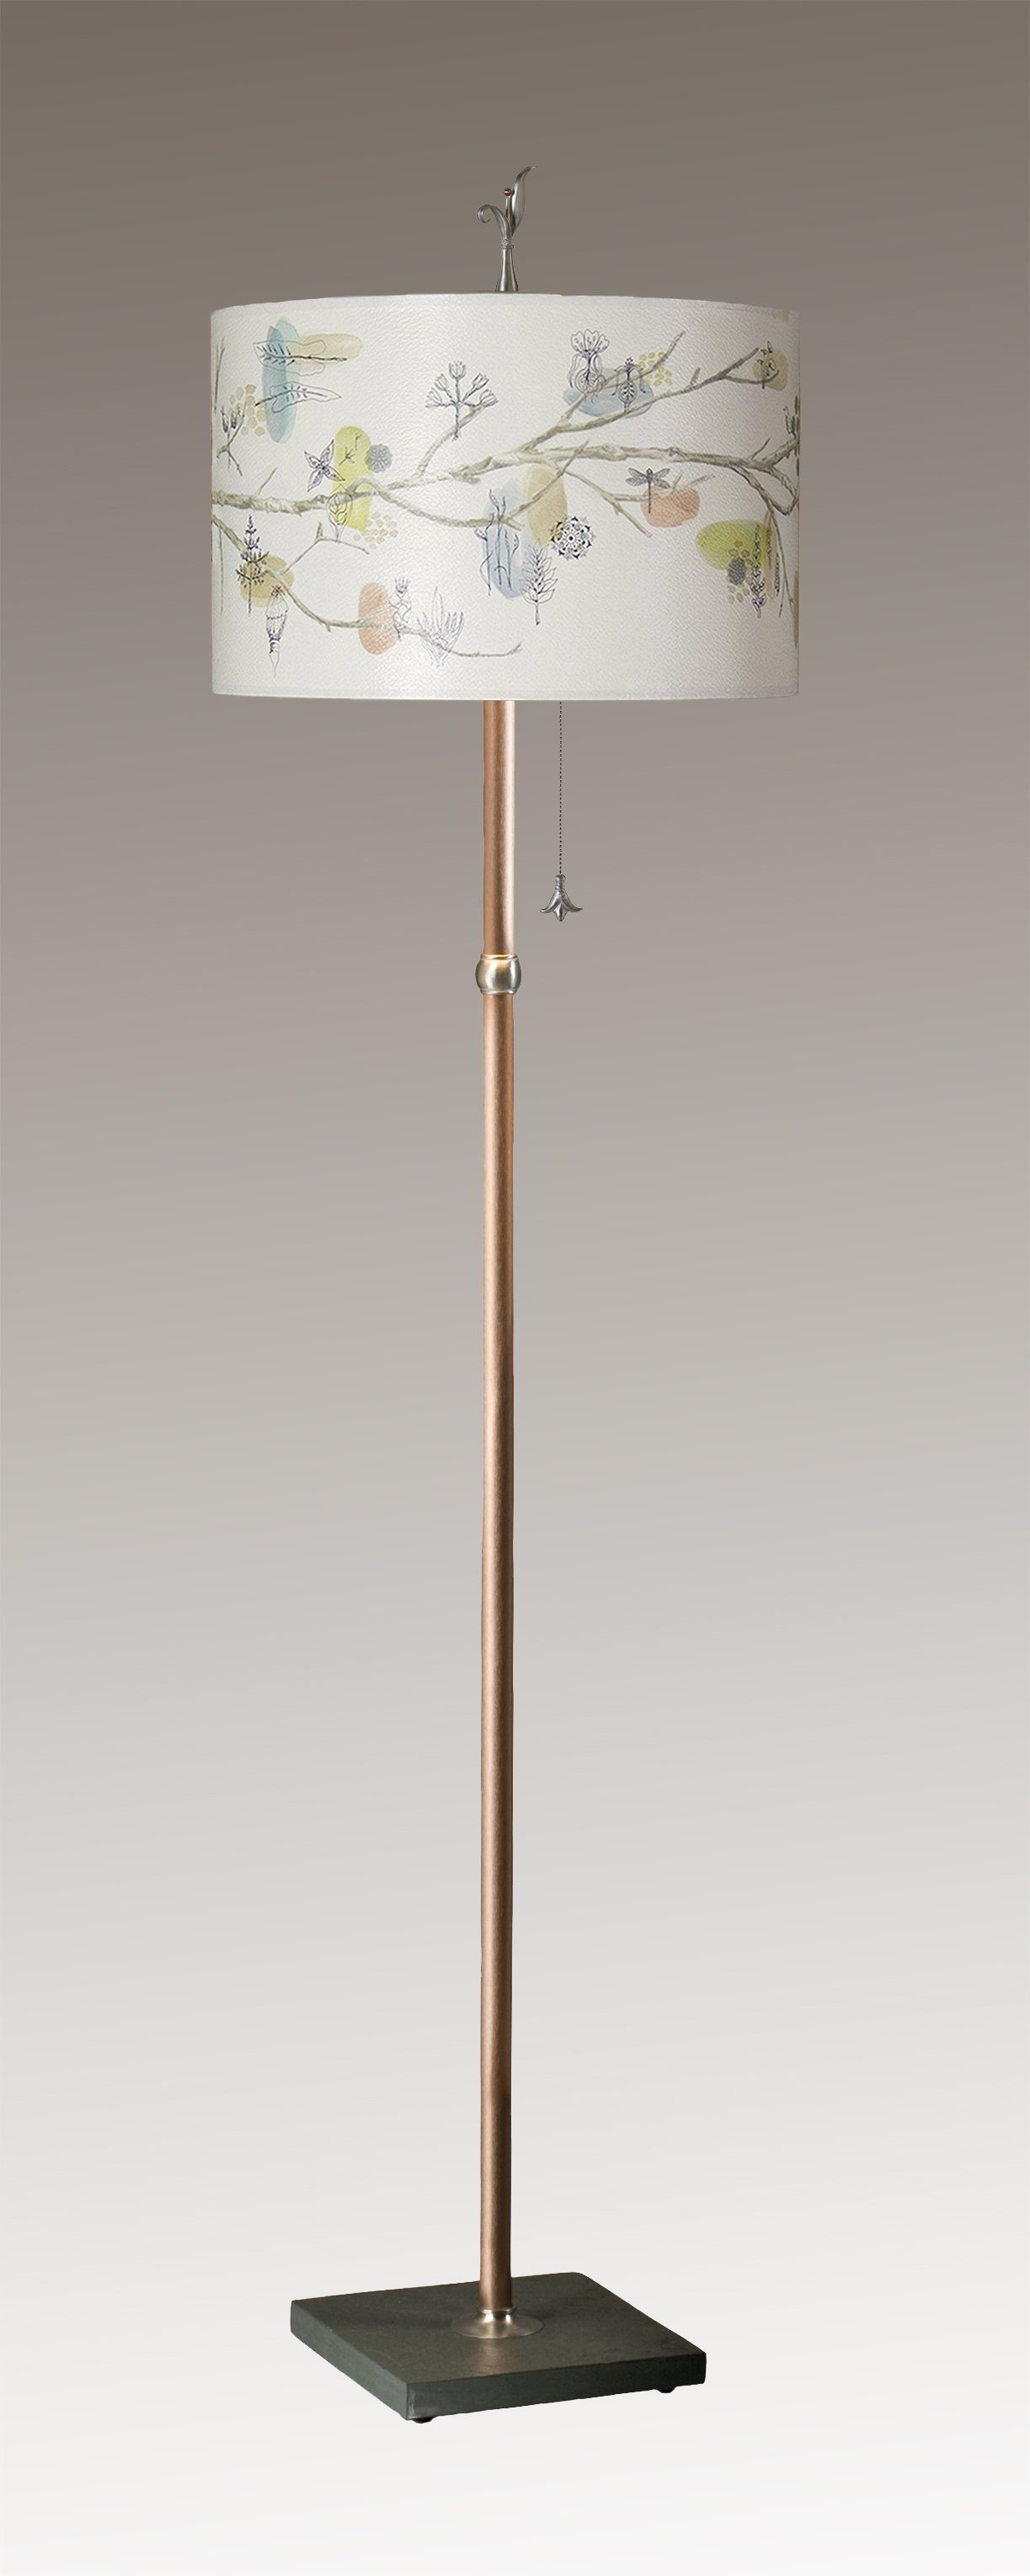 Janna Ugone & Co Floor Lamps Copper Floor Lamp with Large Drum Shade in Artful Branch